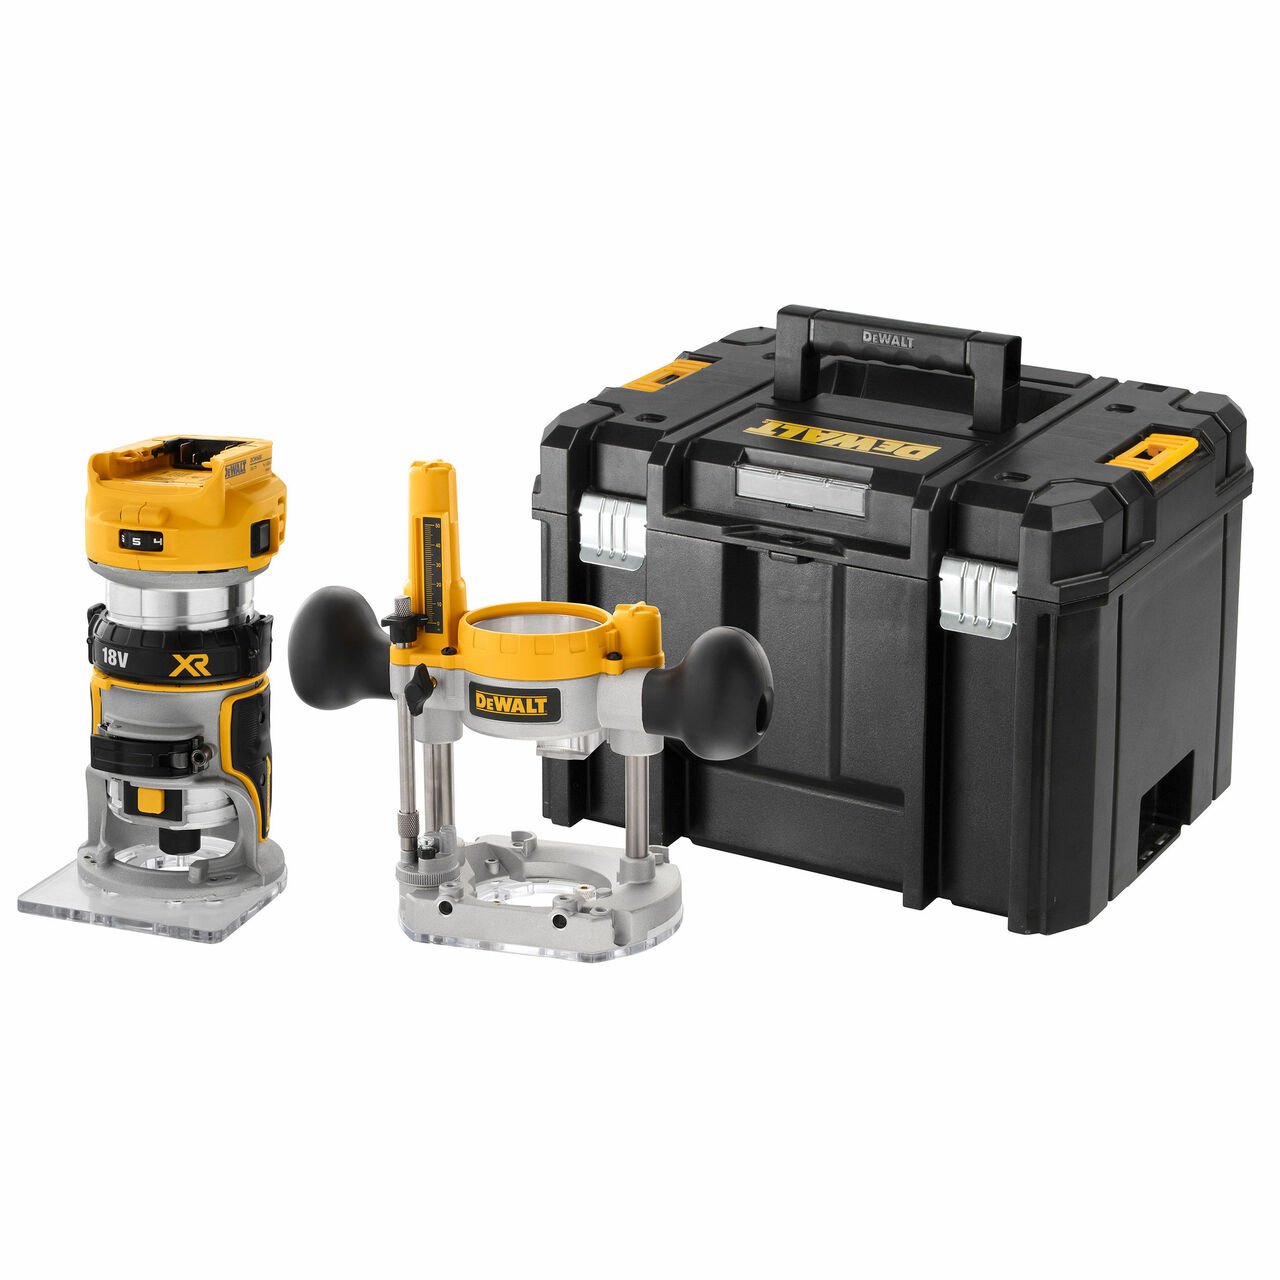 Image of Dewalt <br><strong>DCW604NT 18V 1/4 inch Brushless Router</strong>